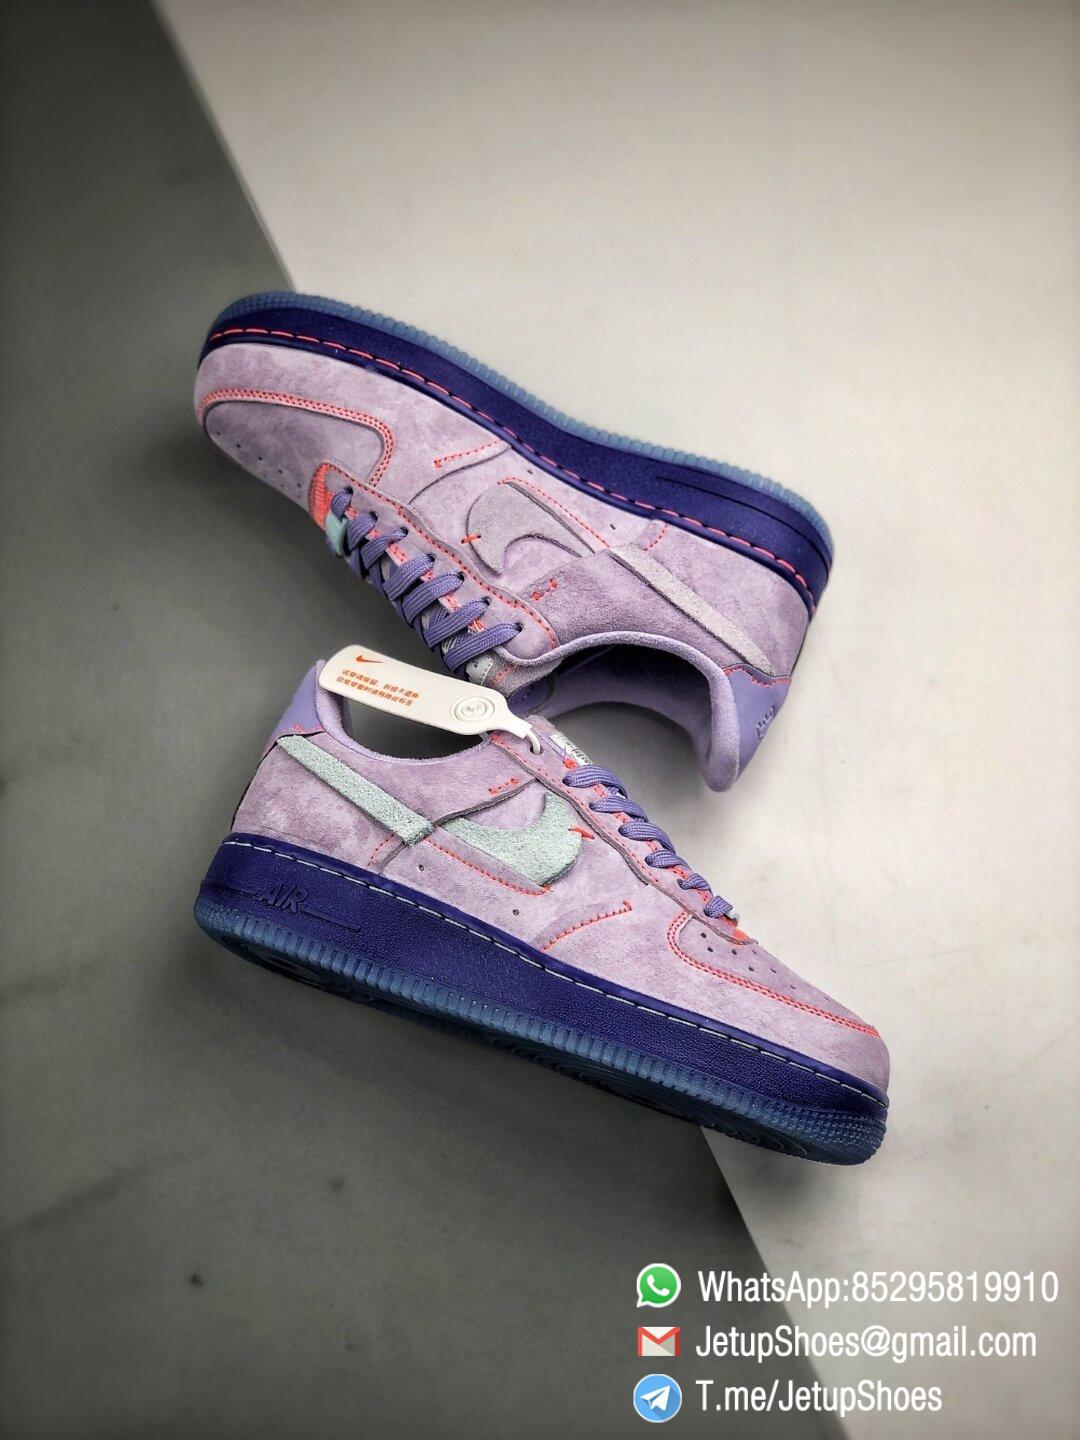 The Wmns Air Force 1 Low LX 'Purple 